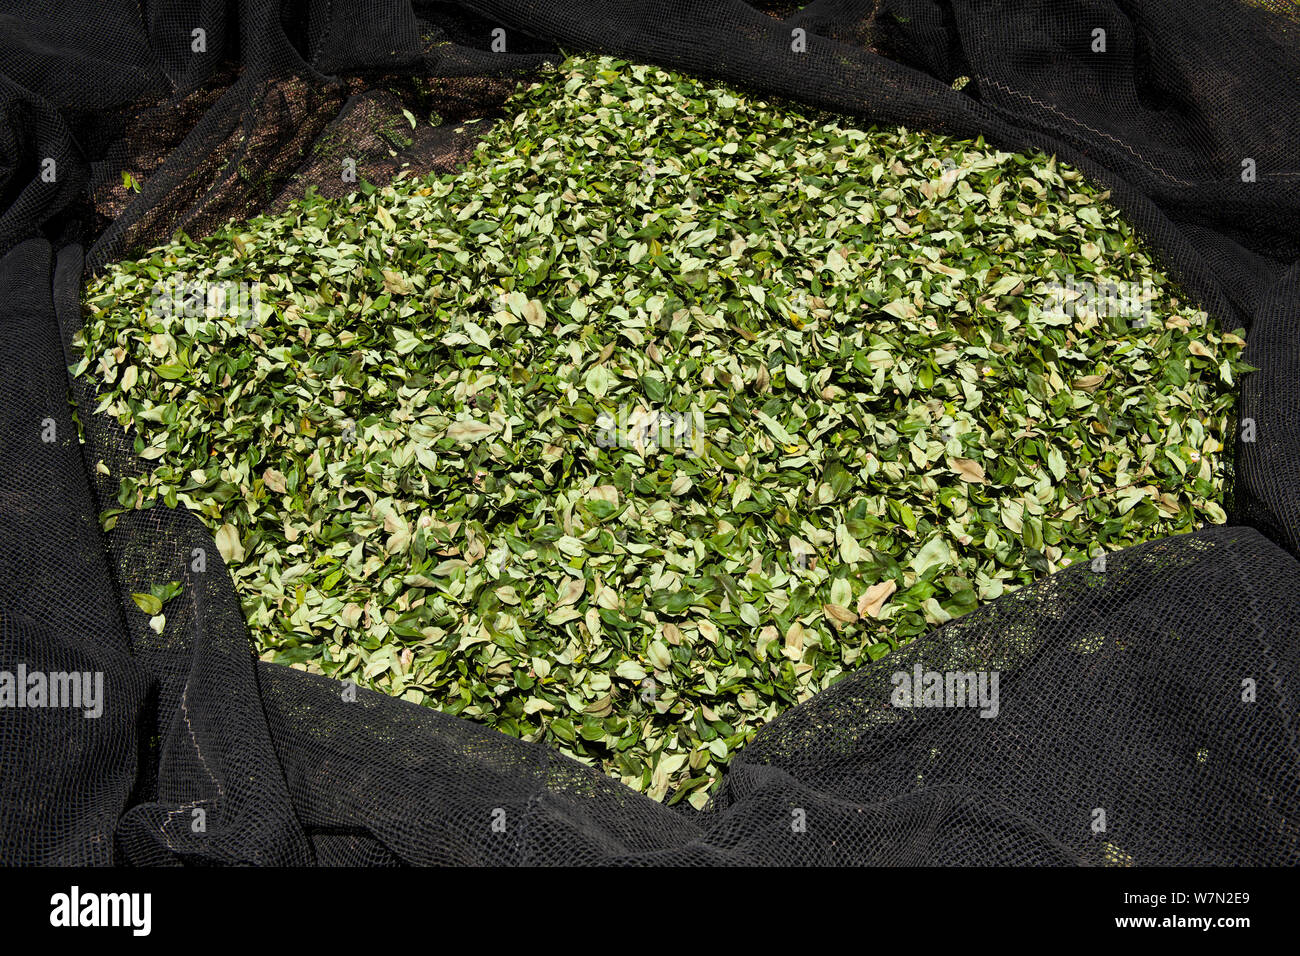 Harvest of Coca (Erythroxylum coca) leaves in net ready to be taken to the market in La Paz, Bolivia, November Stock Photo